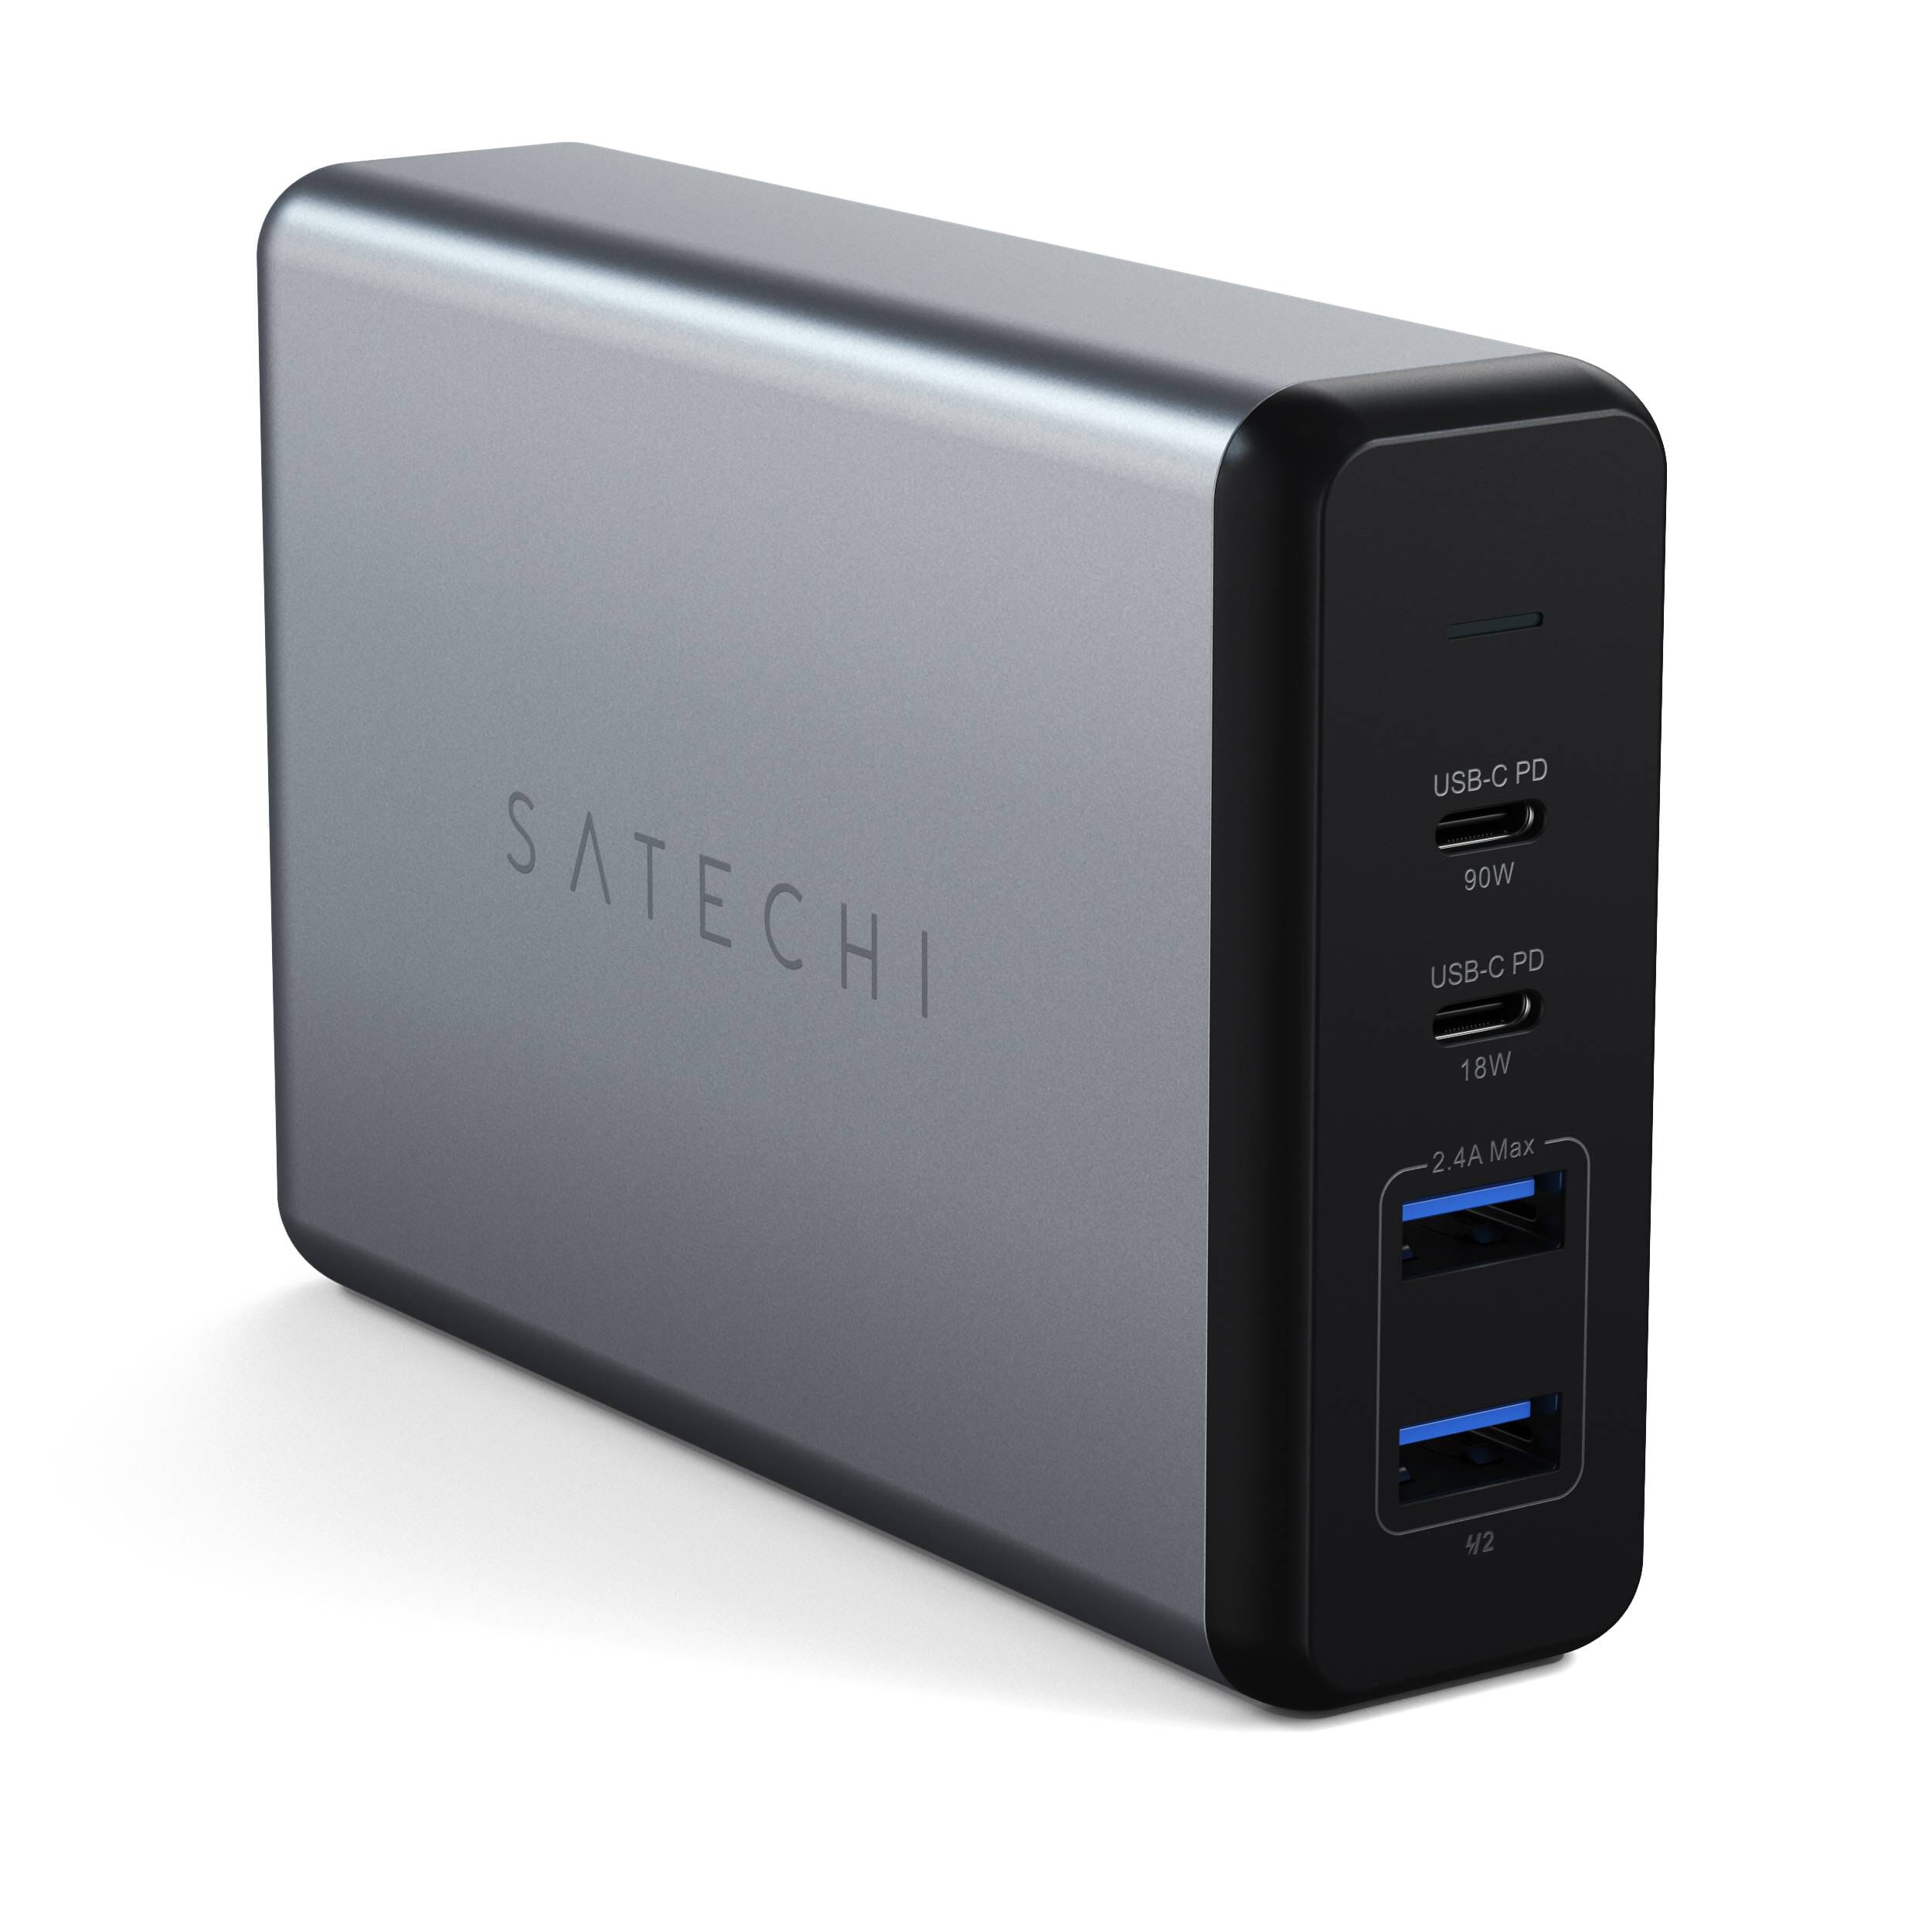 108W Pro USB-C PD Desktop Charger Power Adapters Satechi